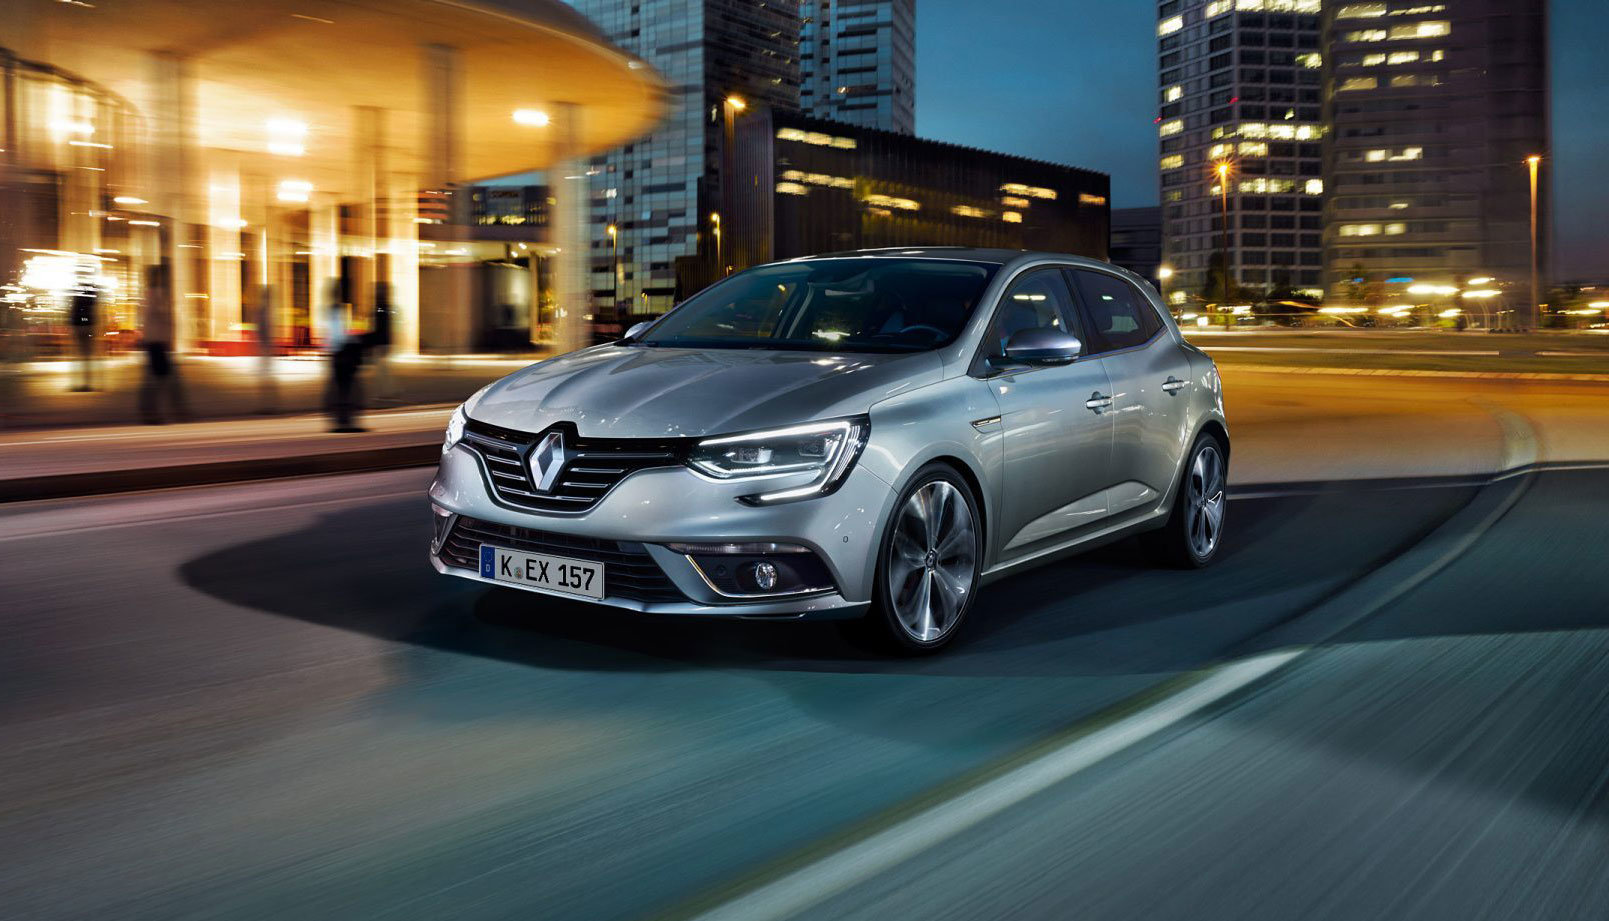 More information about "Renault Megane Limited Edition"